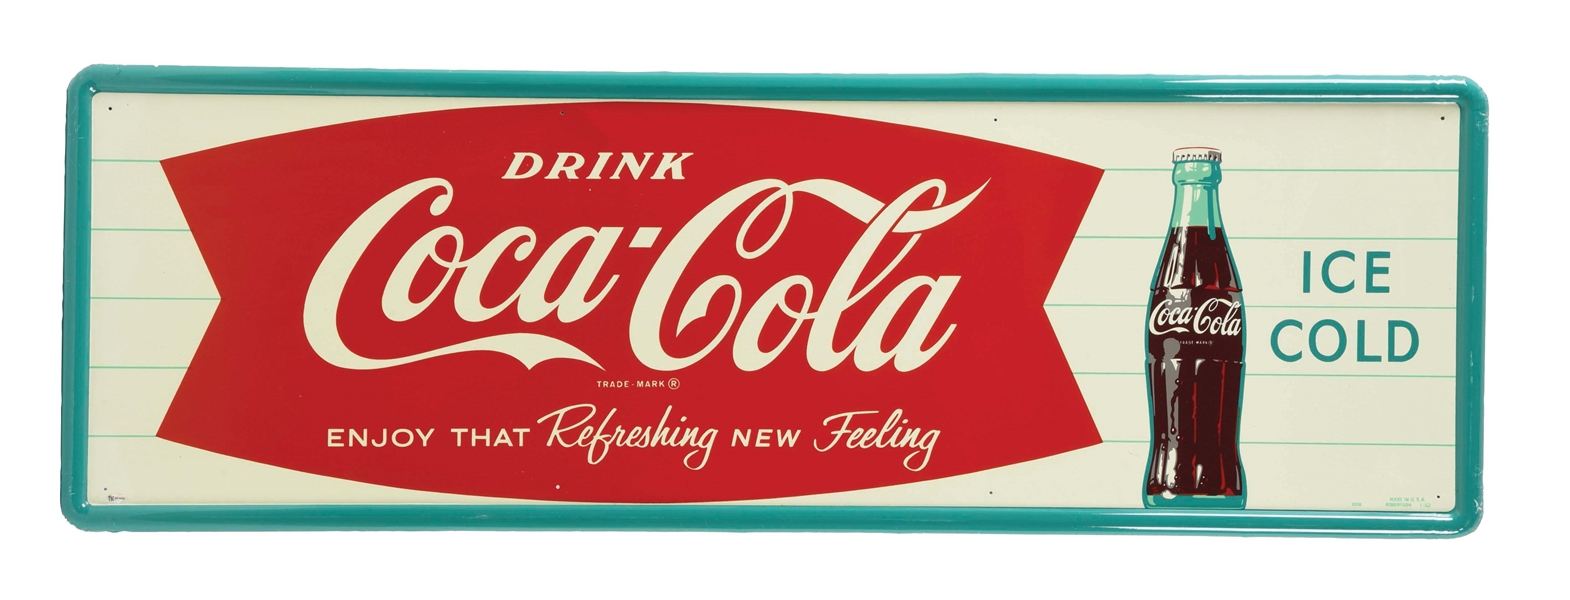 DRINK ICE COLD COCA COLA TIN SIGN W/ BOTTLE & FISHTAIL GRAPHIC. 